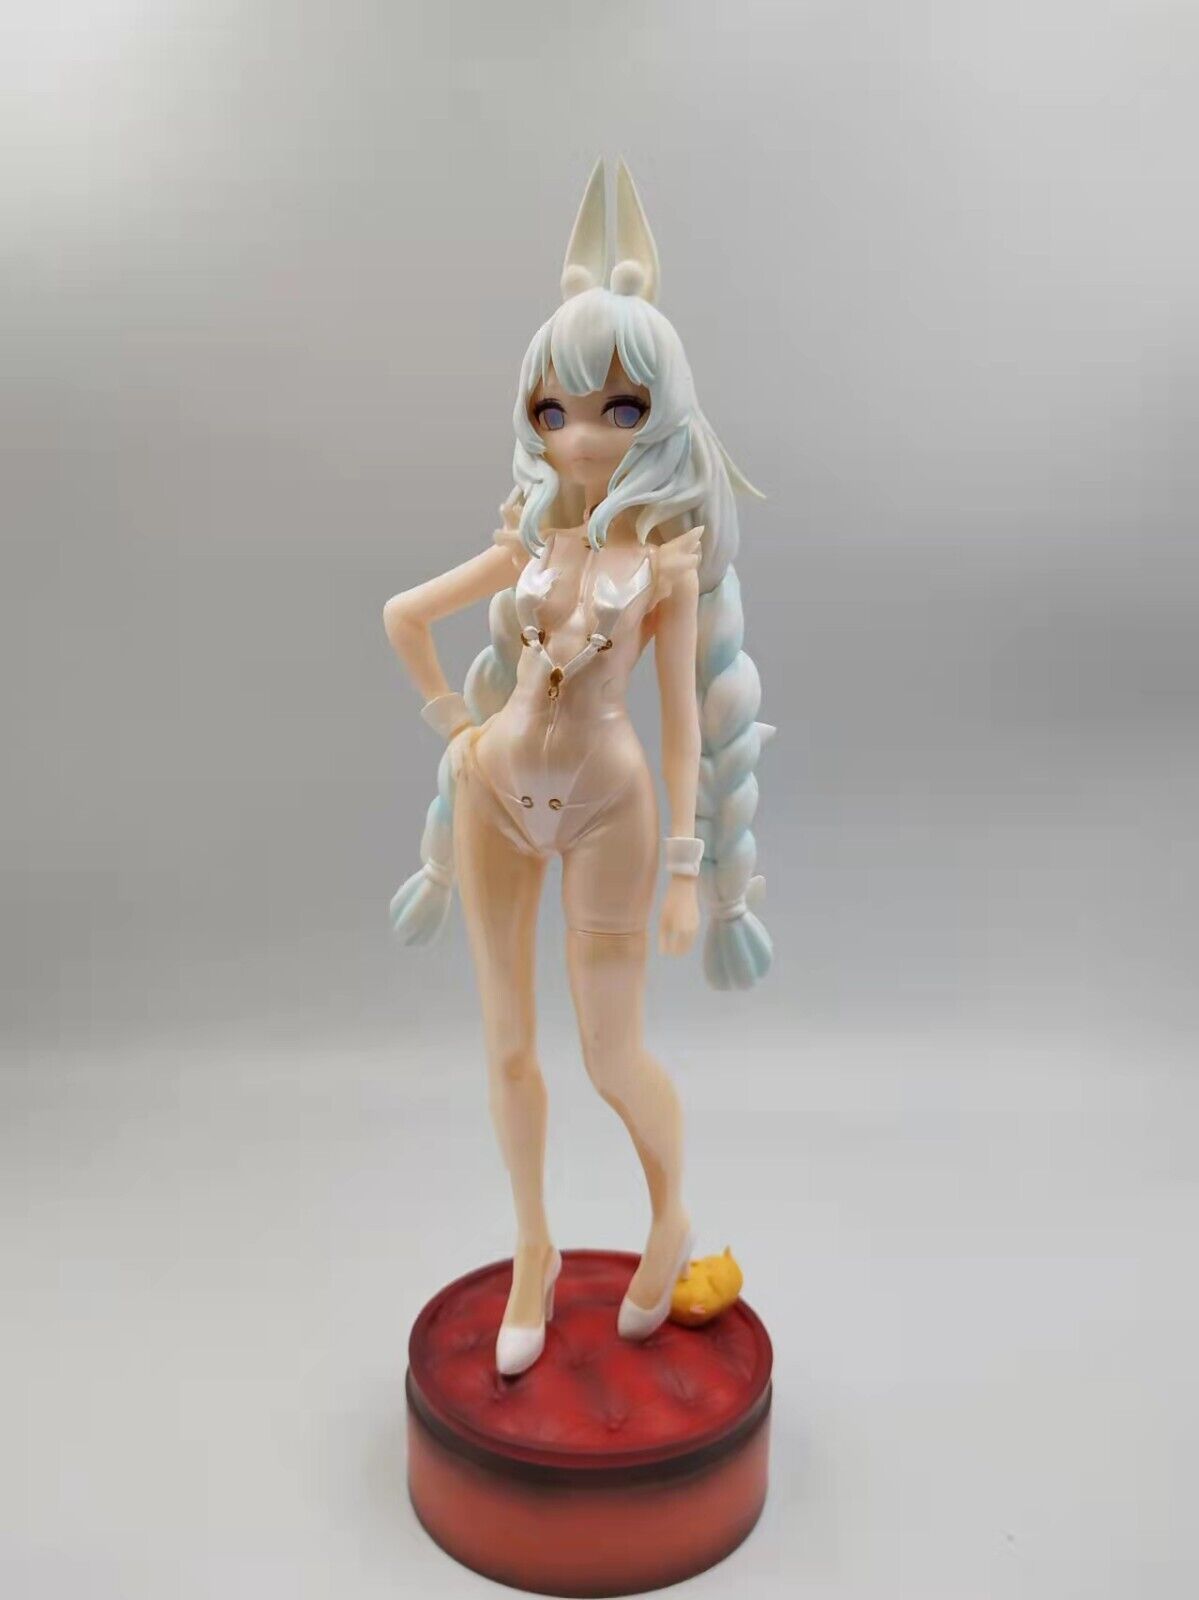 New No box 1/6 26CM Anime statue Characters Figures PVC Toy Collect toy gift